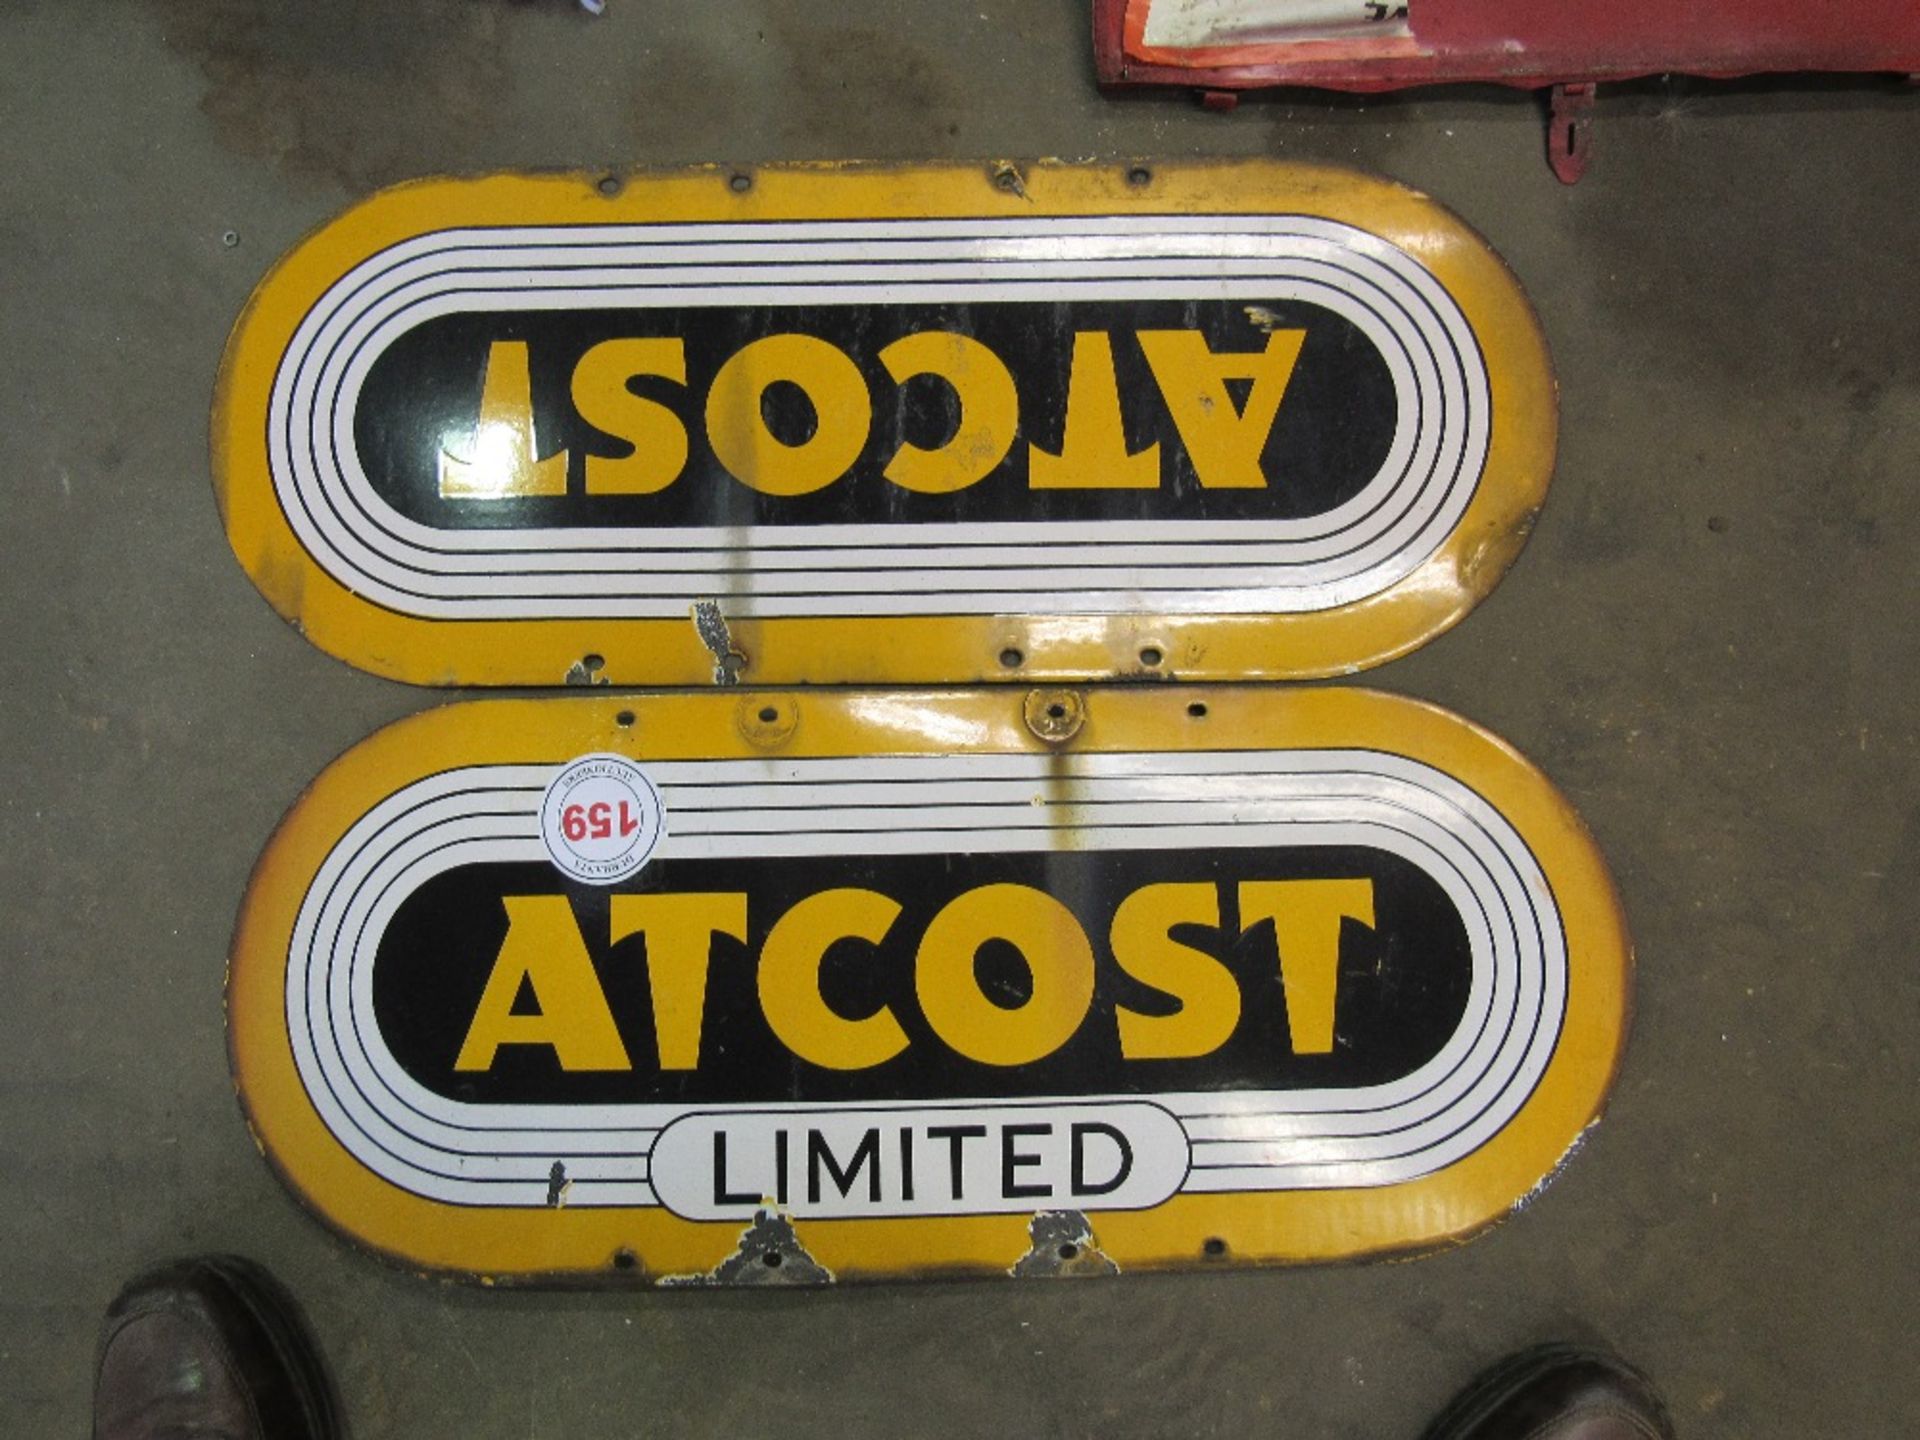 2 x Atcost enamel signs - Image 3 of 3